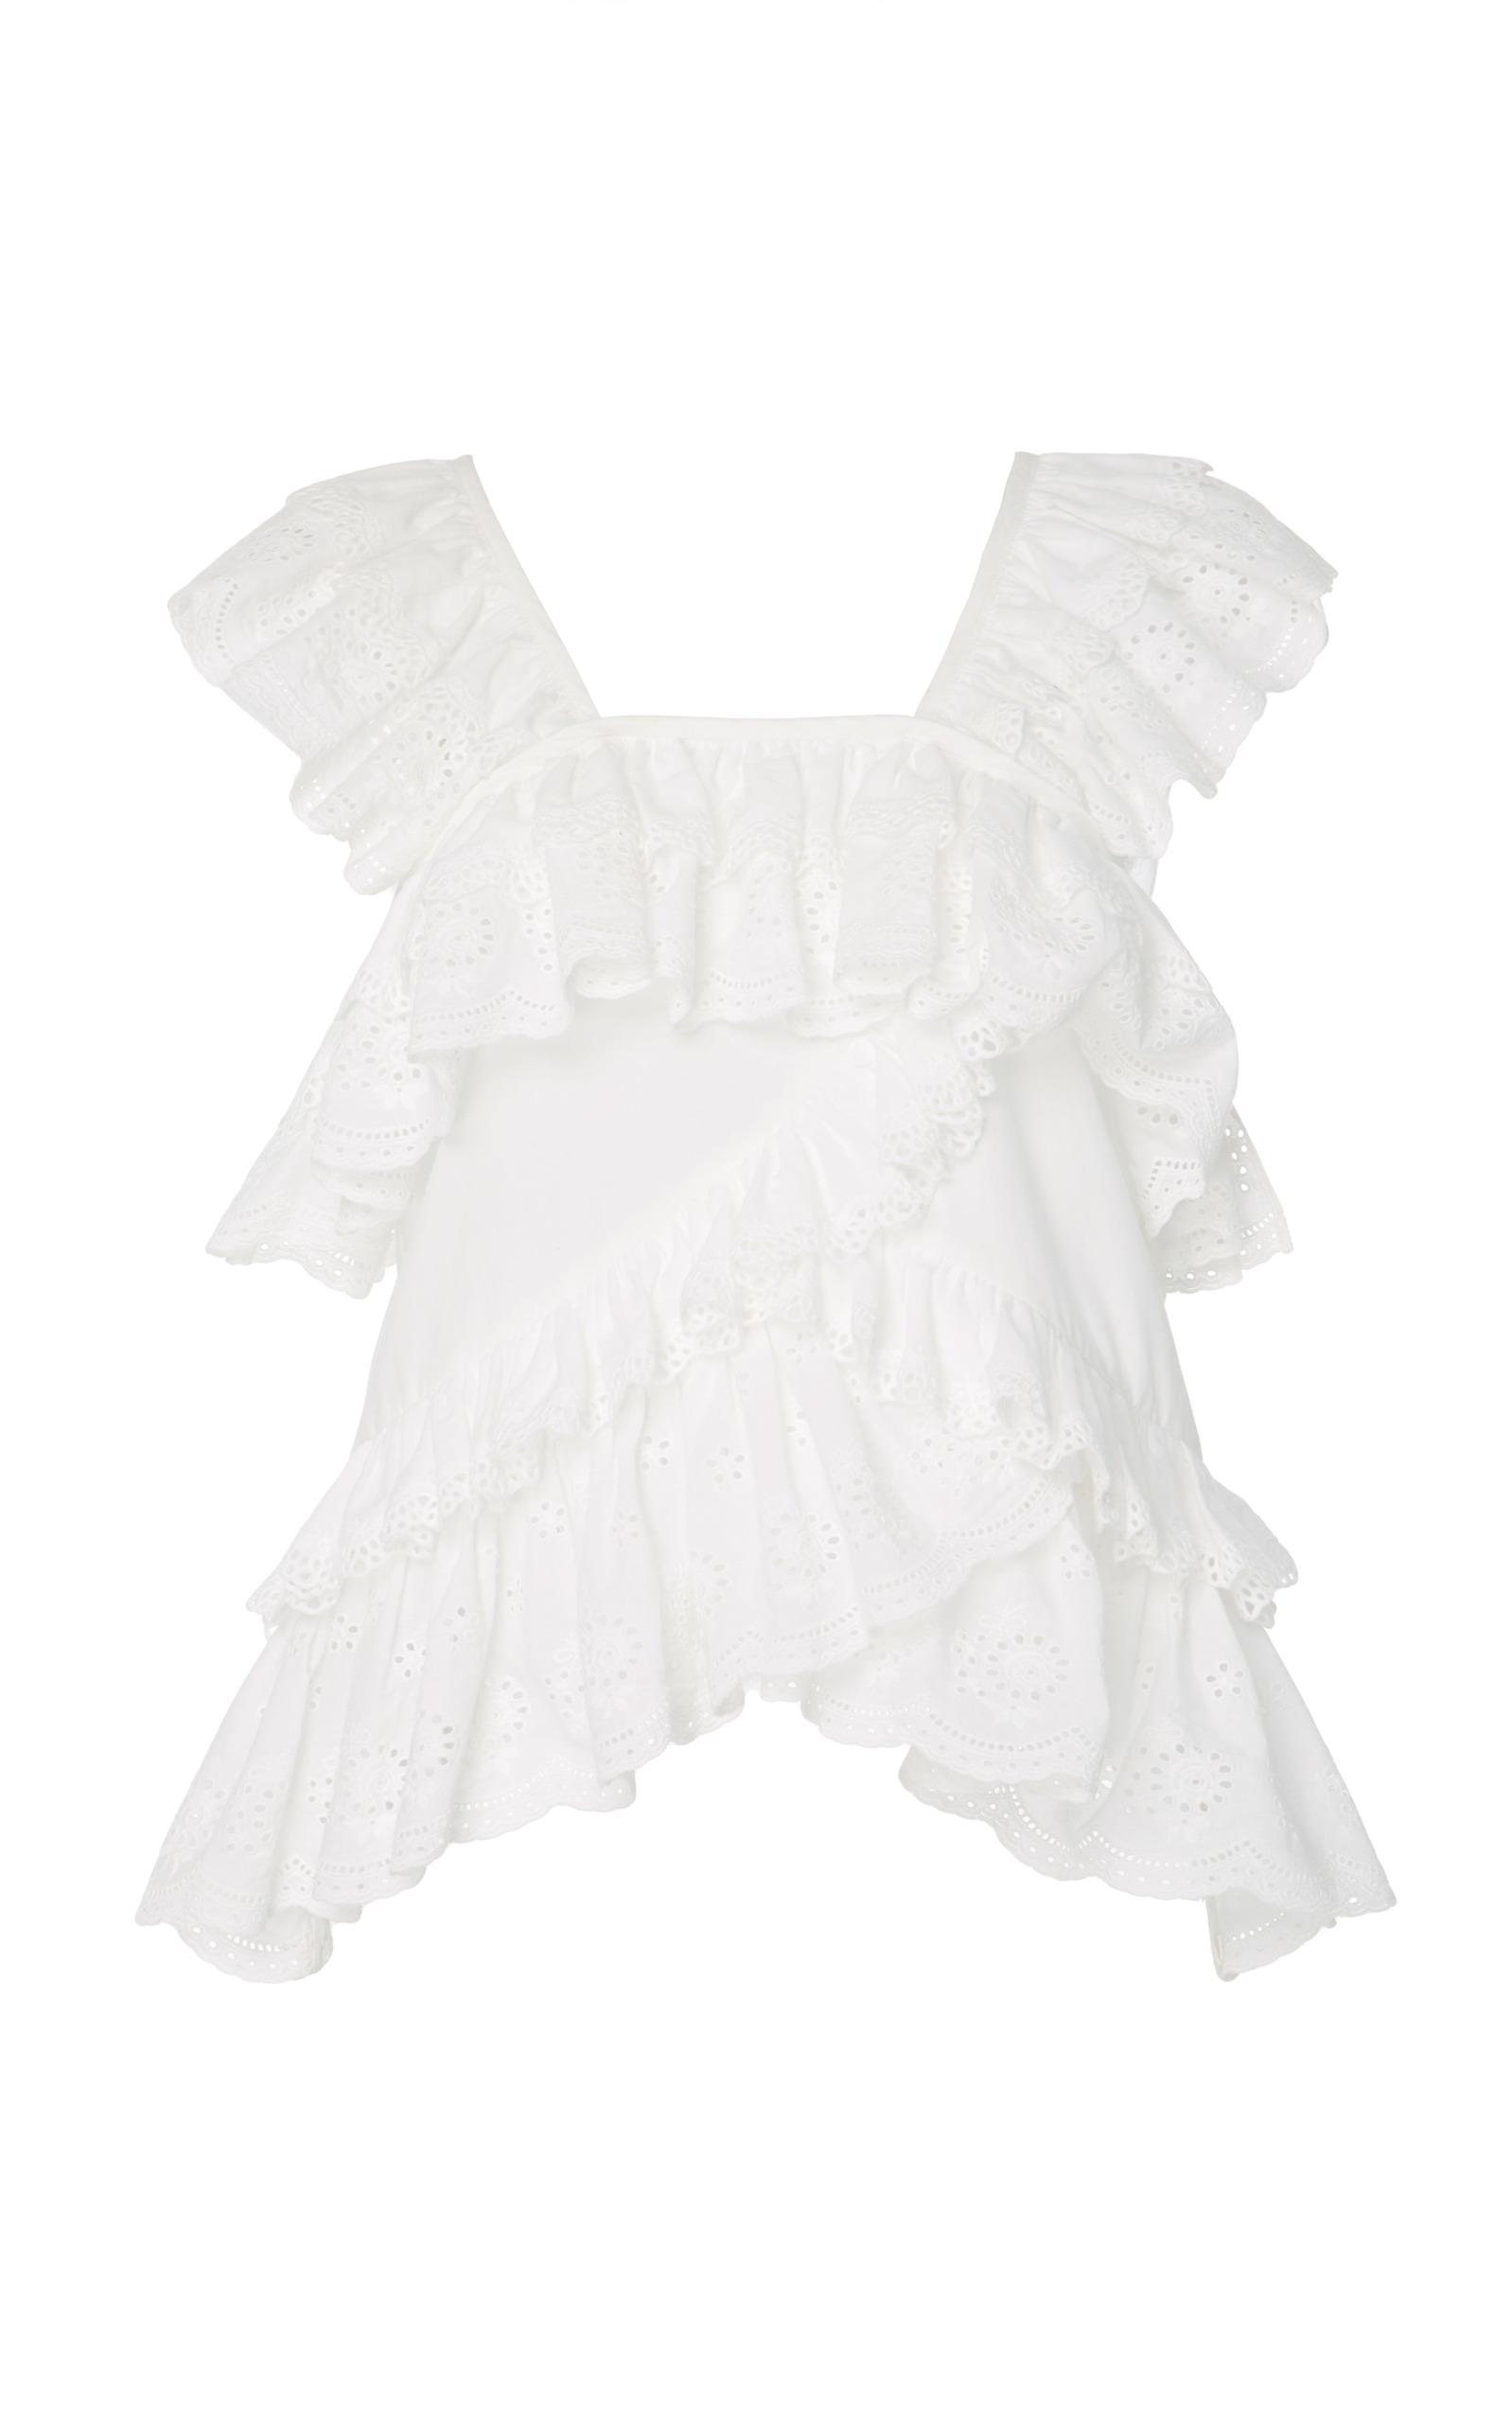 Goen J Sleeveless Top With Lace Ruffle Trim & Layers In White | ModeSens